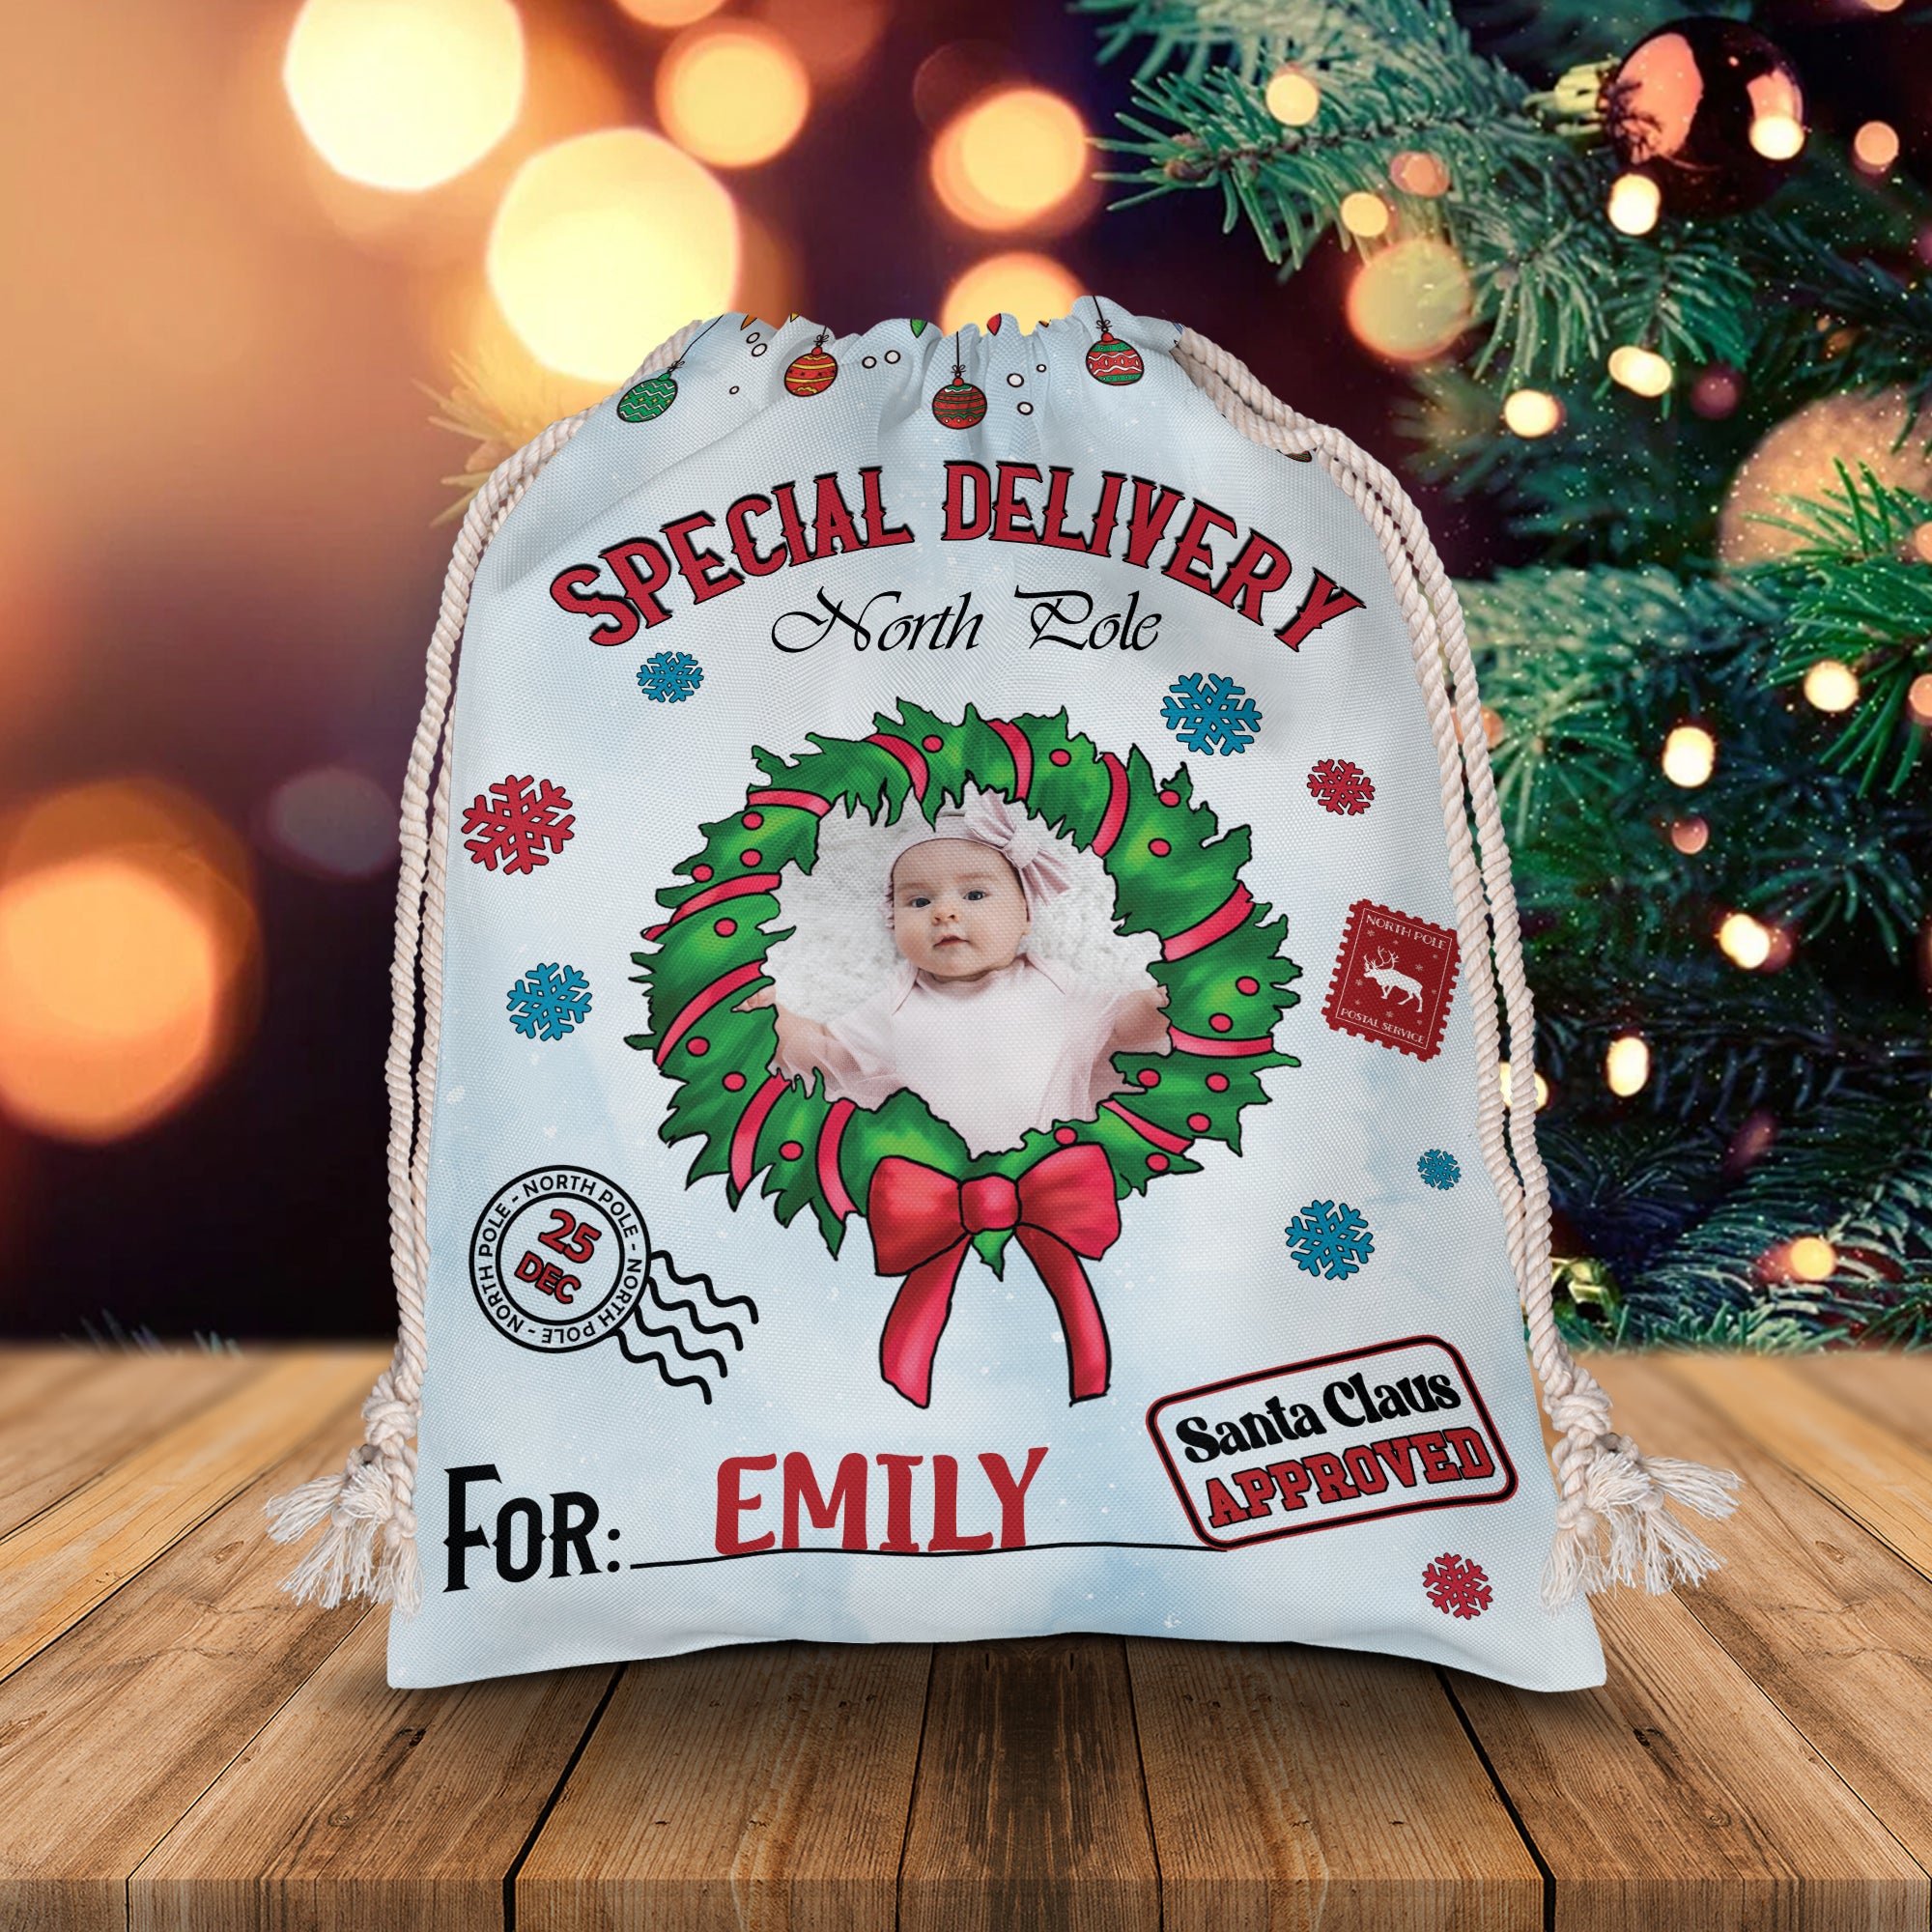 Merry Christmas Special Delivery North Pole For Kid - Custom Photo And Name, Personalized String Bag, Gift For Family, Christmas Gift